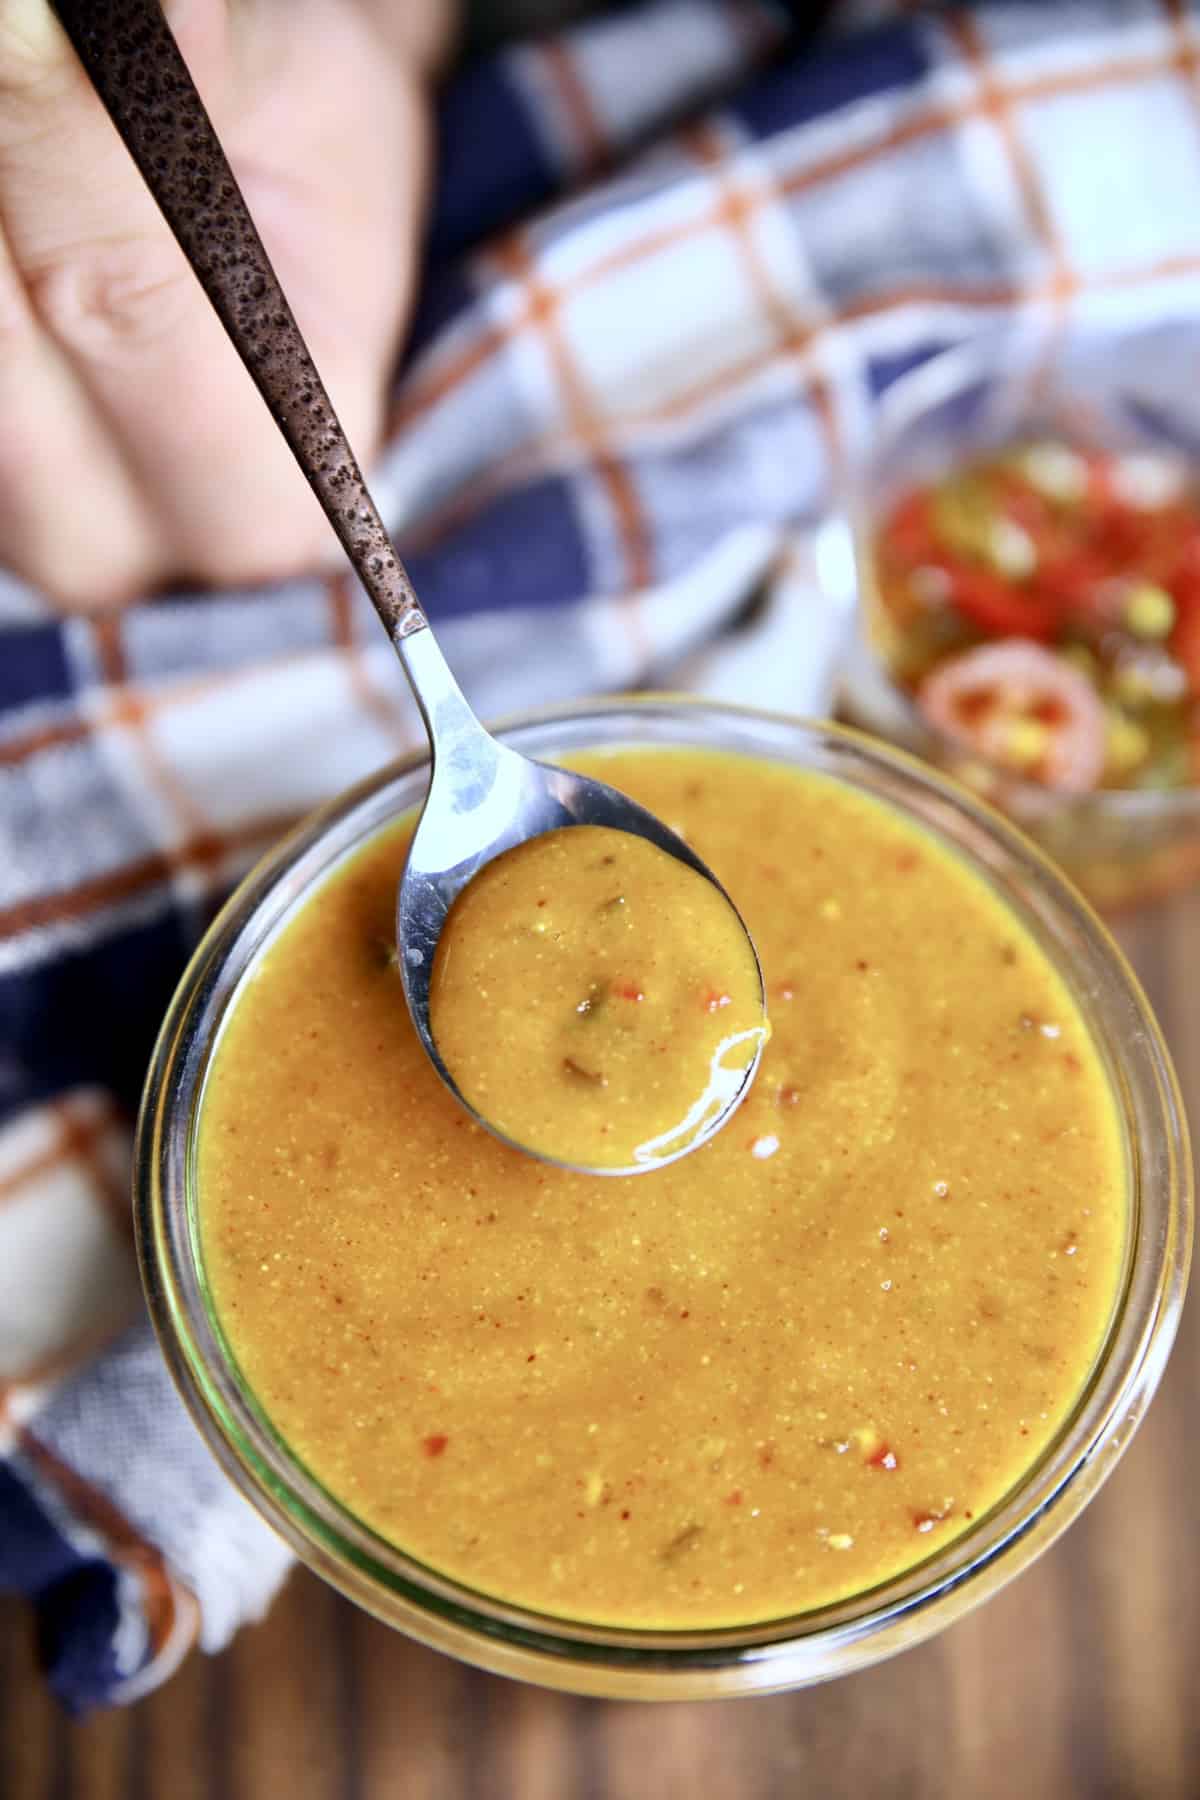 Bowl with a spoonful of mustard sauce.